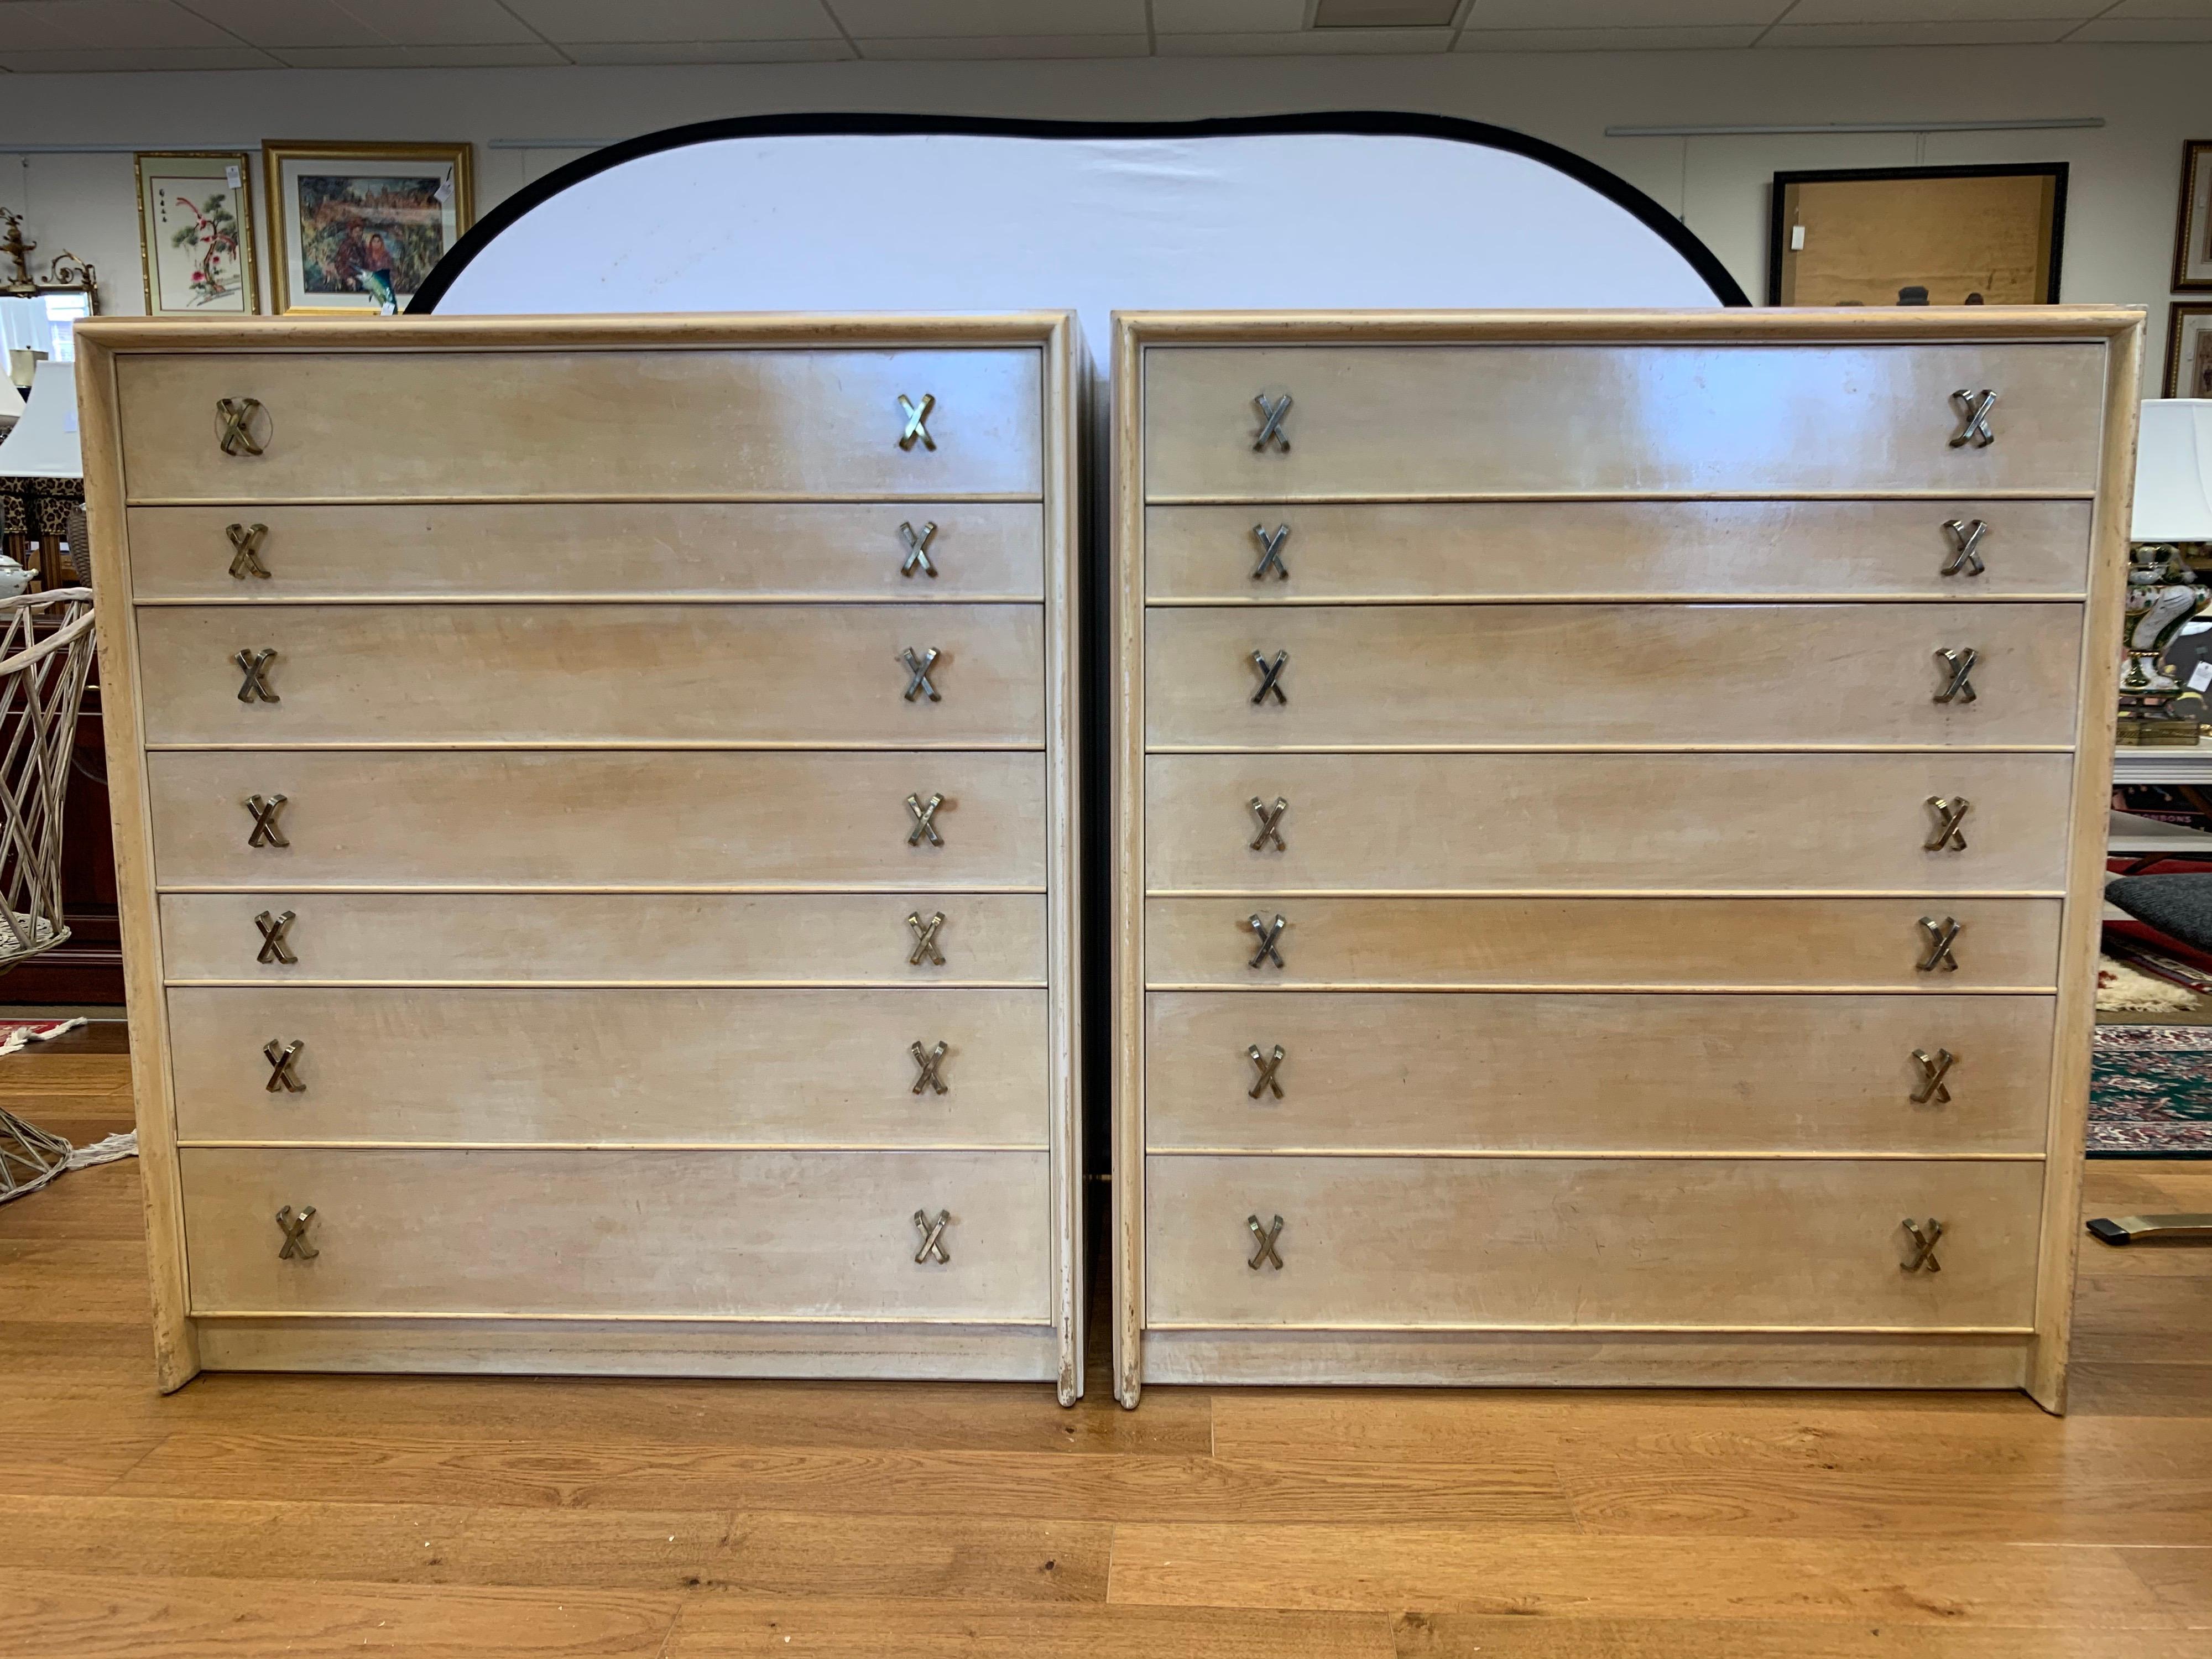 This matching pair of sophisticated high chests were designed by Paul Frankl for the Johnson Furniture Company, circa late 1940s-early 1950s. The coveted Johnson hallmark is incised inside both. The set is a prime example of Frankl's midcentury